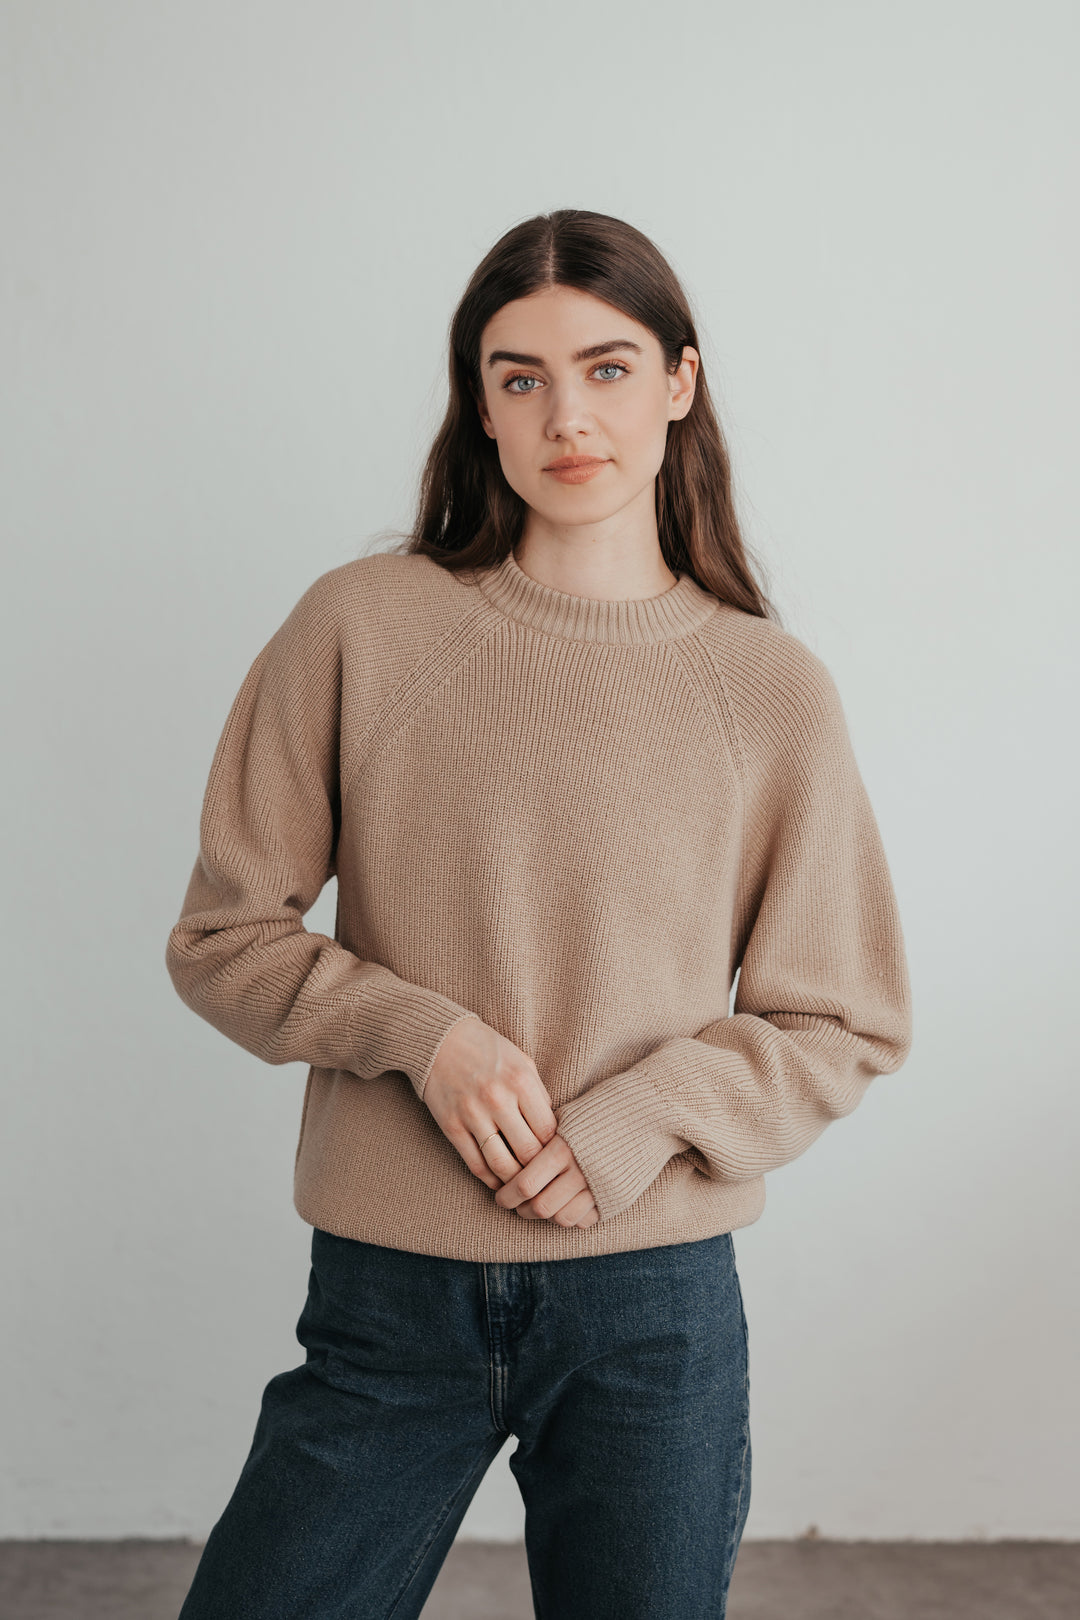 Knitted sweater made of wool (merino) with an oversized fit